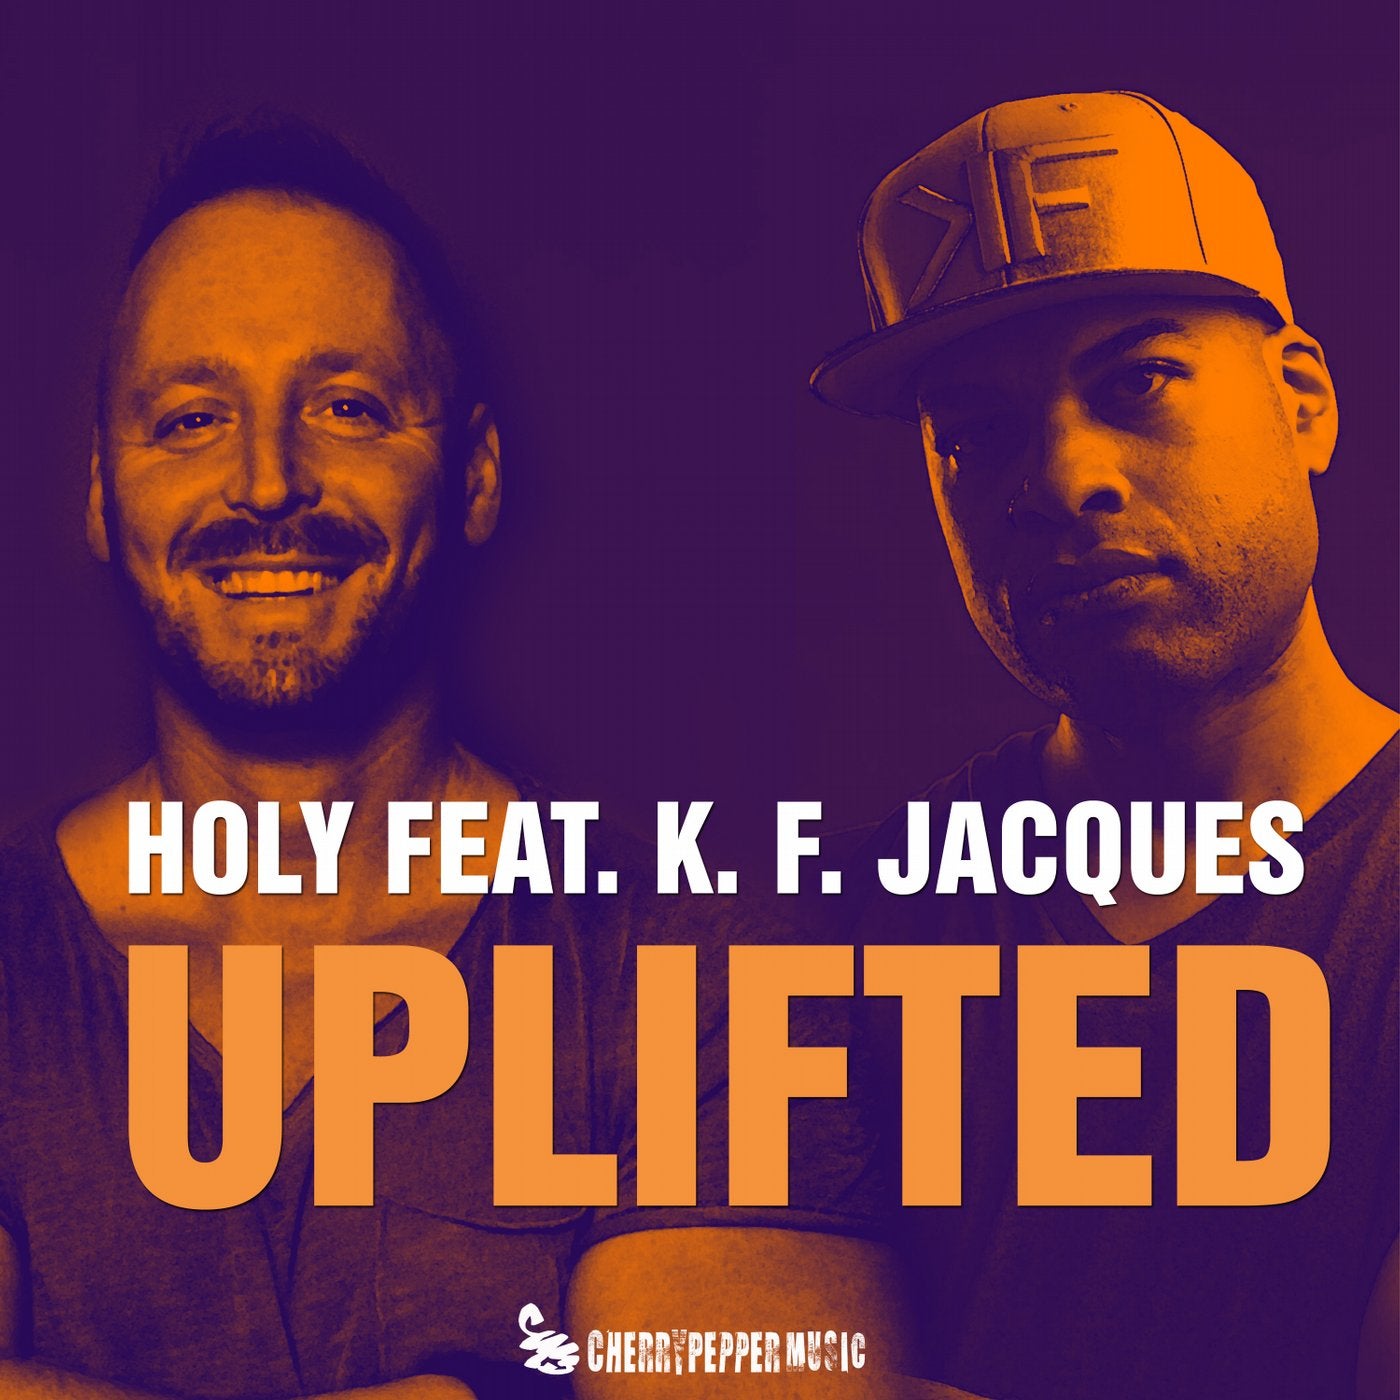 Uplifted (feat. K.F. Jacques)